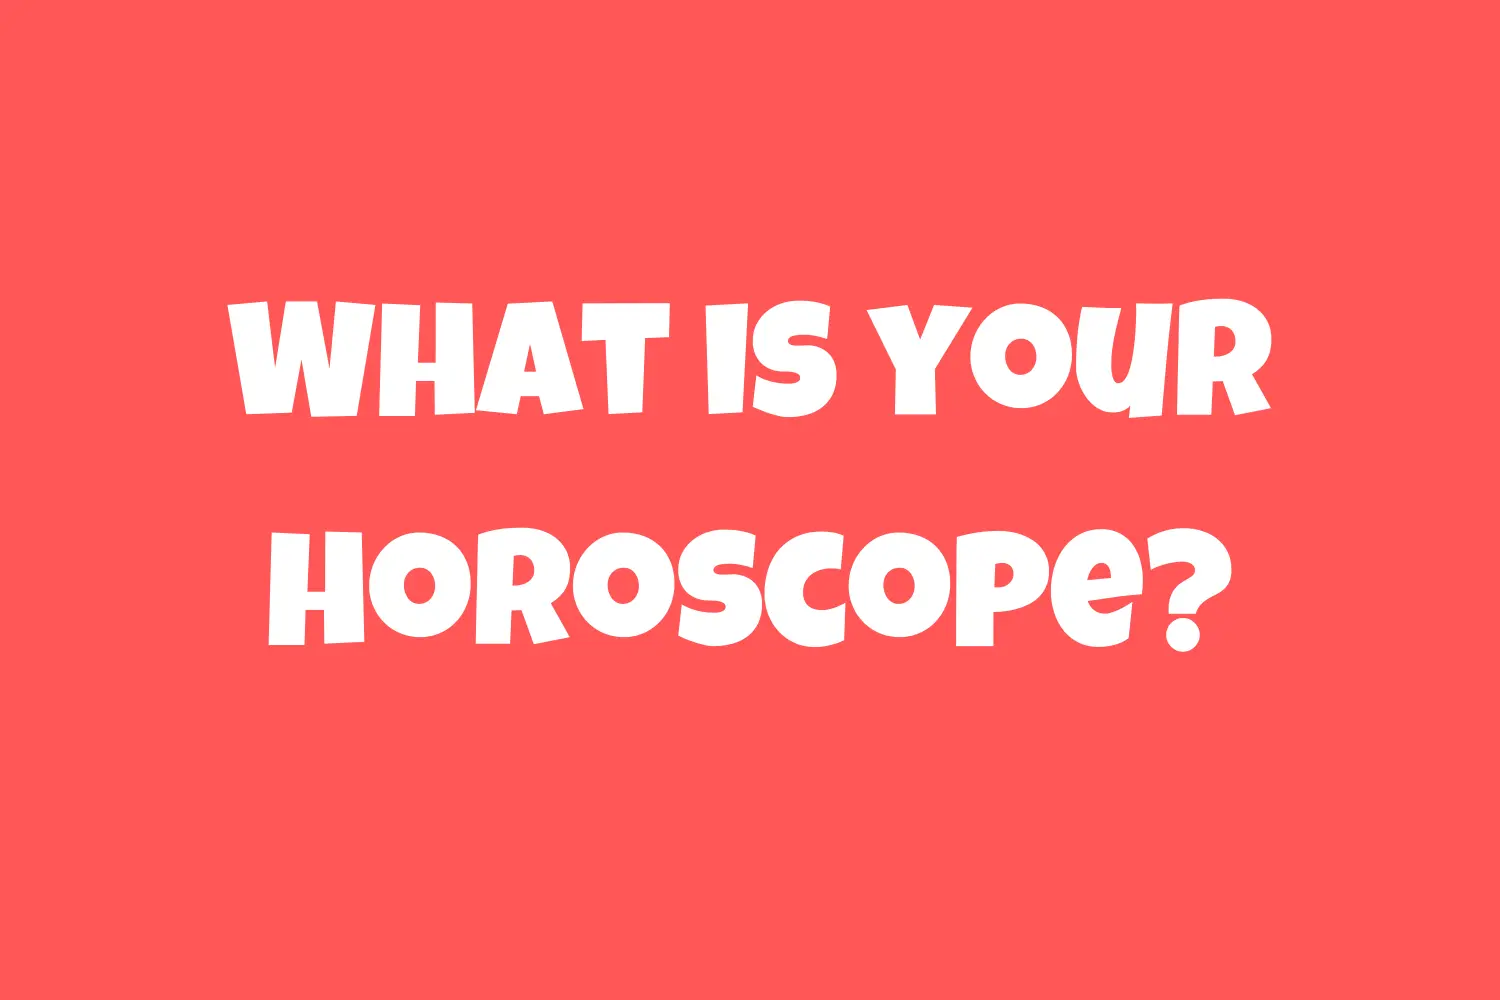 What is your horoscope